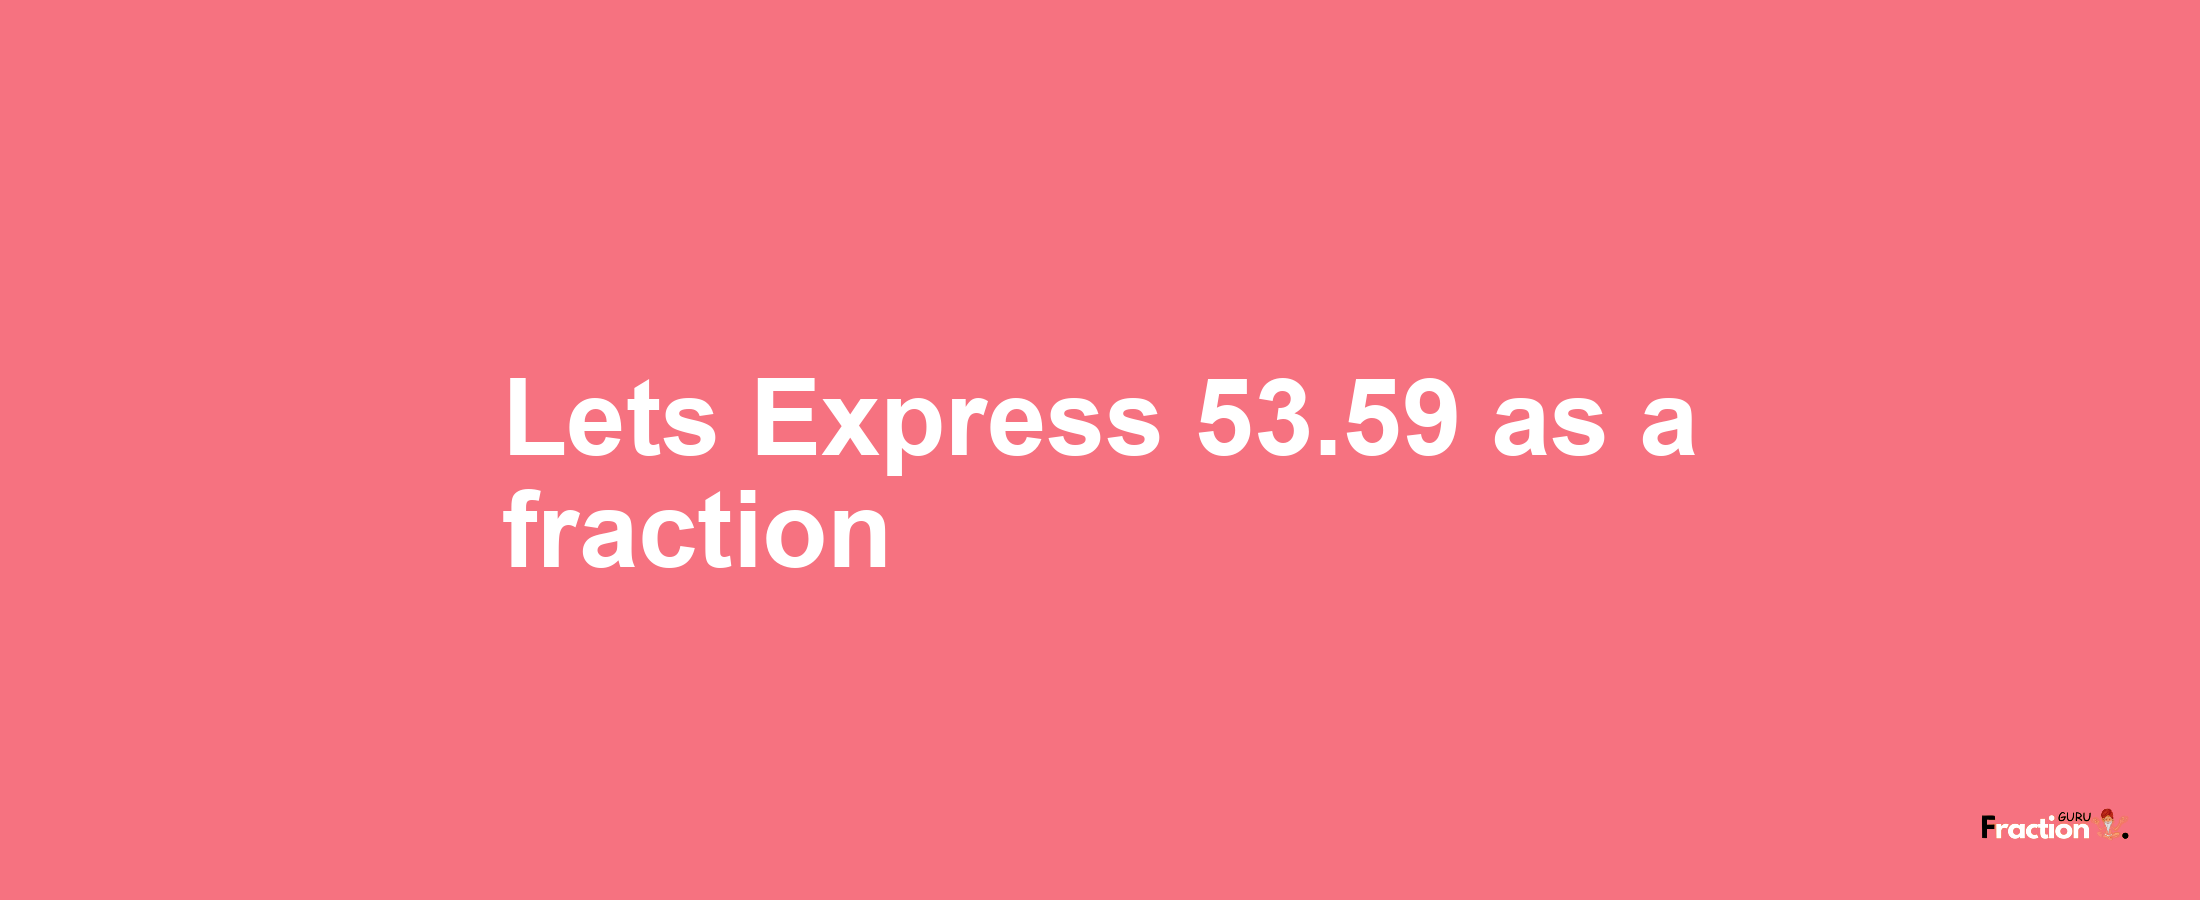 Lets Express 53.59 as afraction